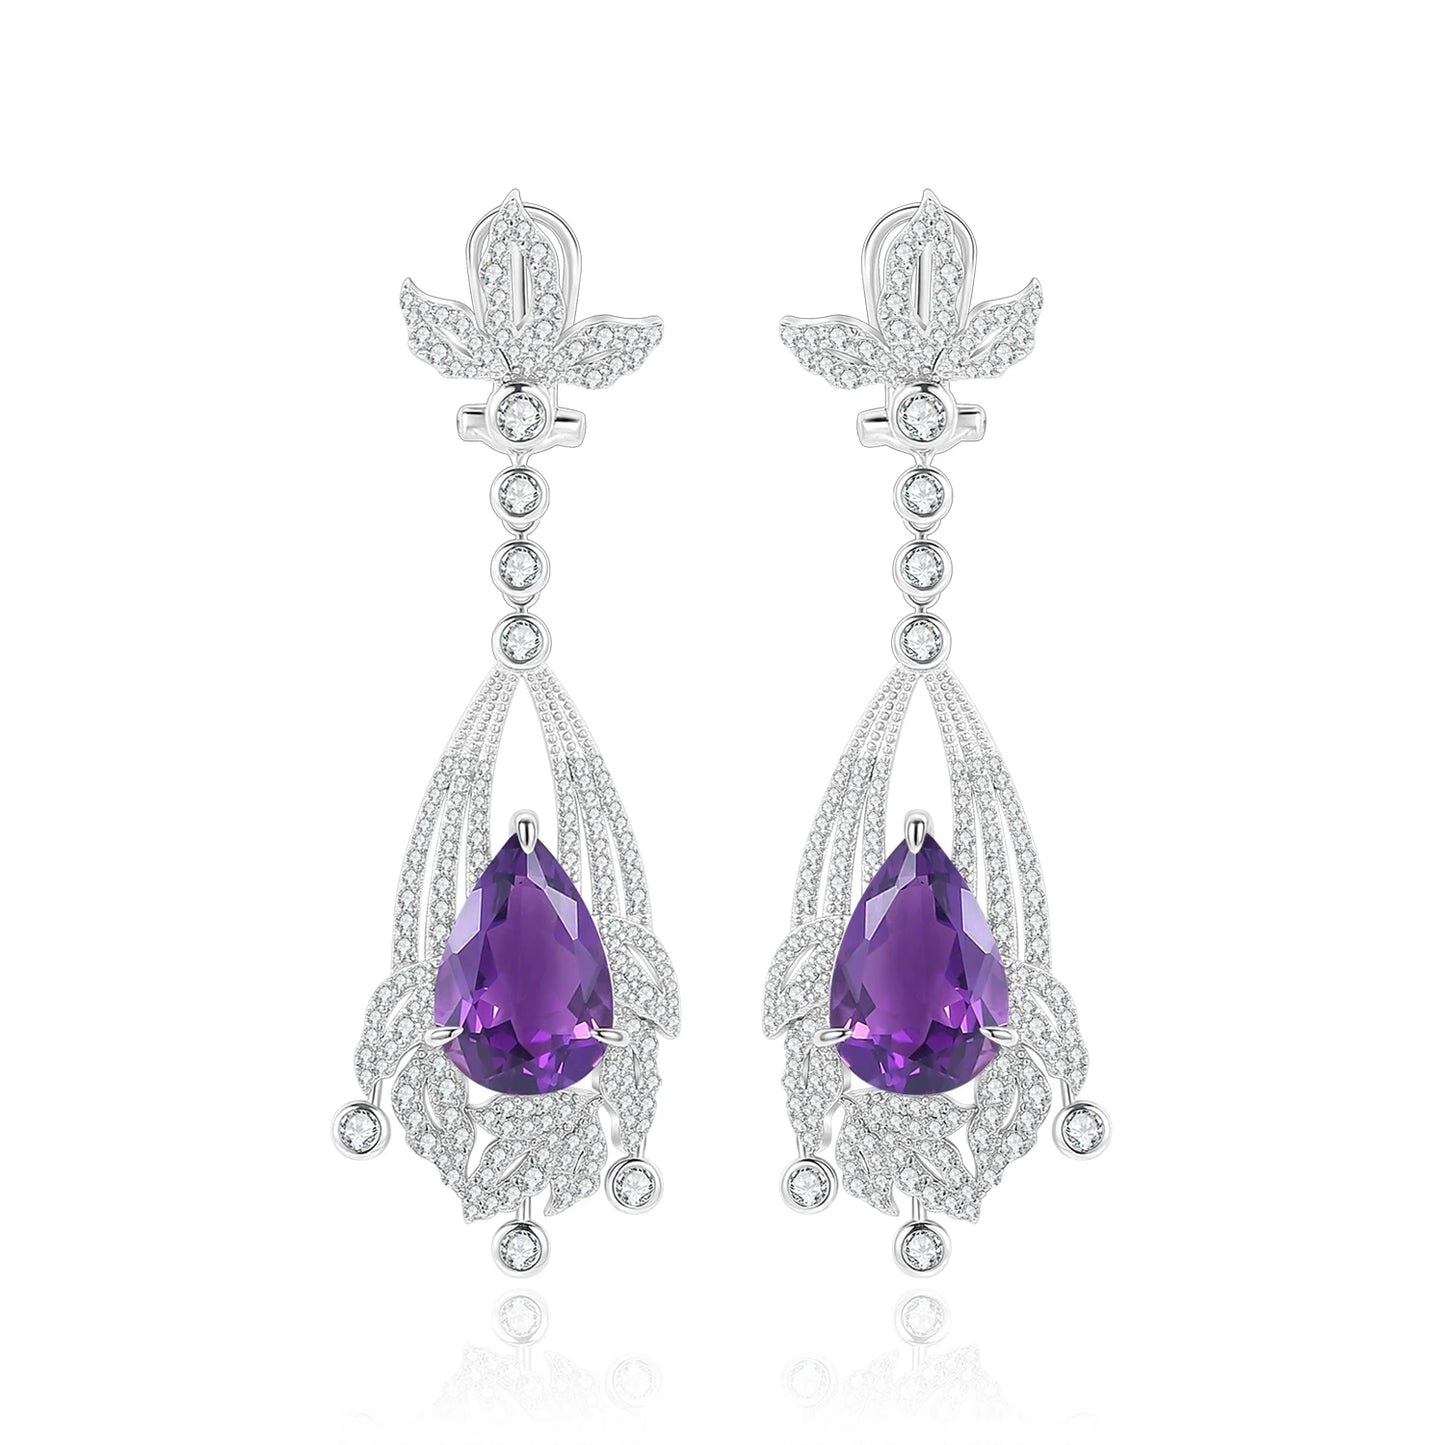 GEM'S BALLET Natural Amethyst Statement Earrings in 925 Sterling Silver Chandelier Earrings Luxury Bridal Jewelry Gift For Her Amethyst 925 Sterling Silver CHINA